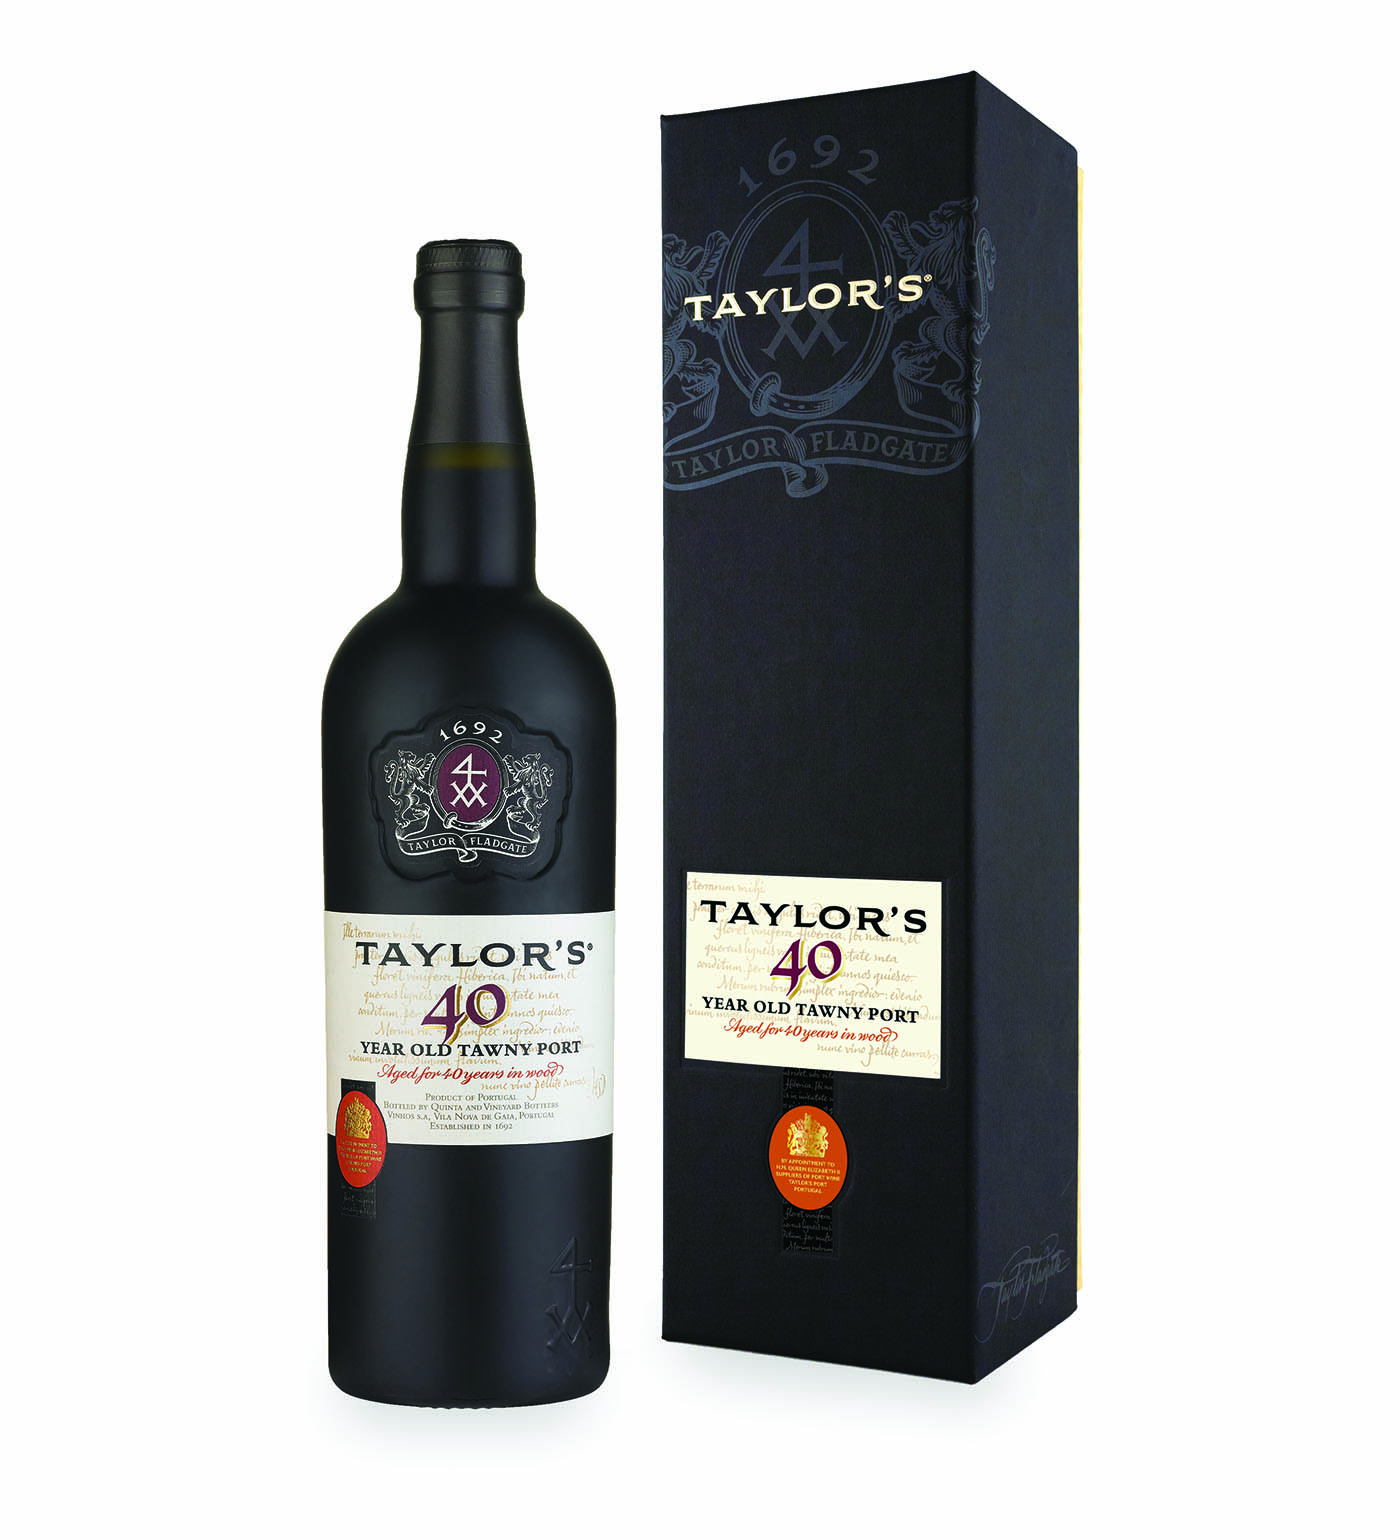 Taylor's Port 40 year old Tawny in luxury box